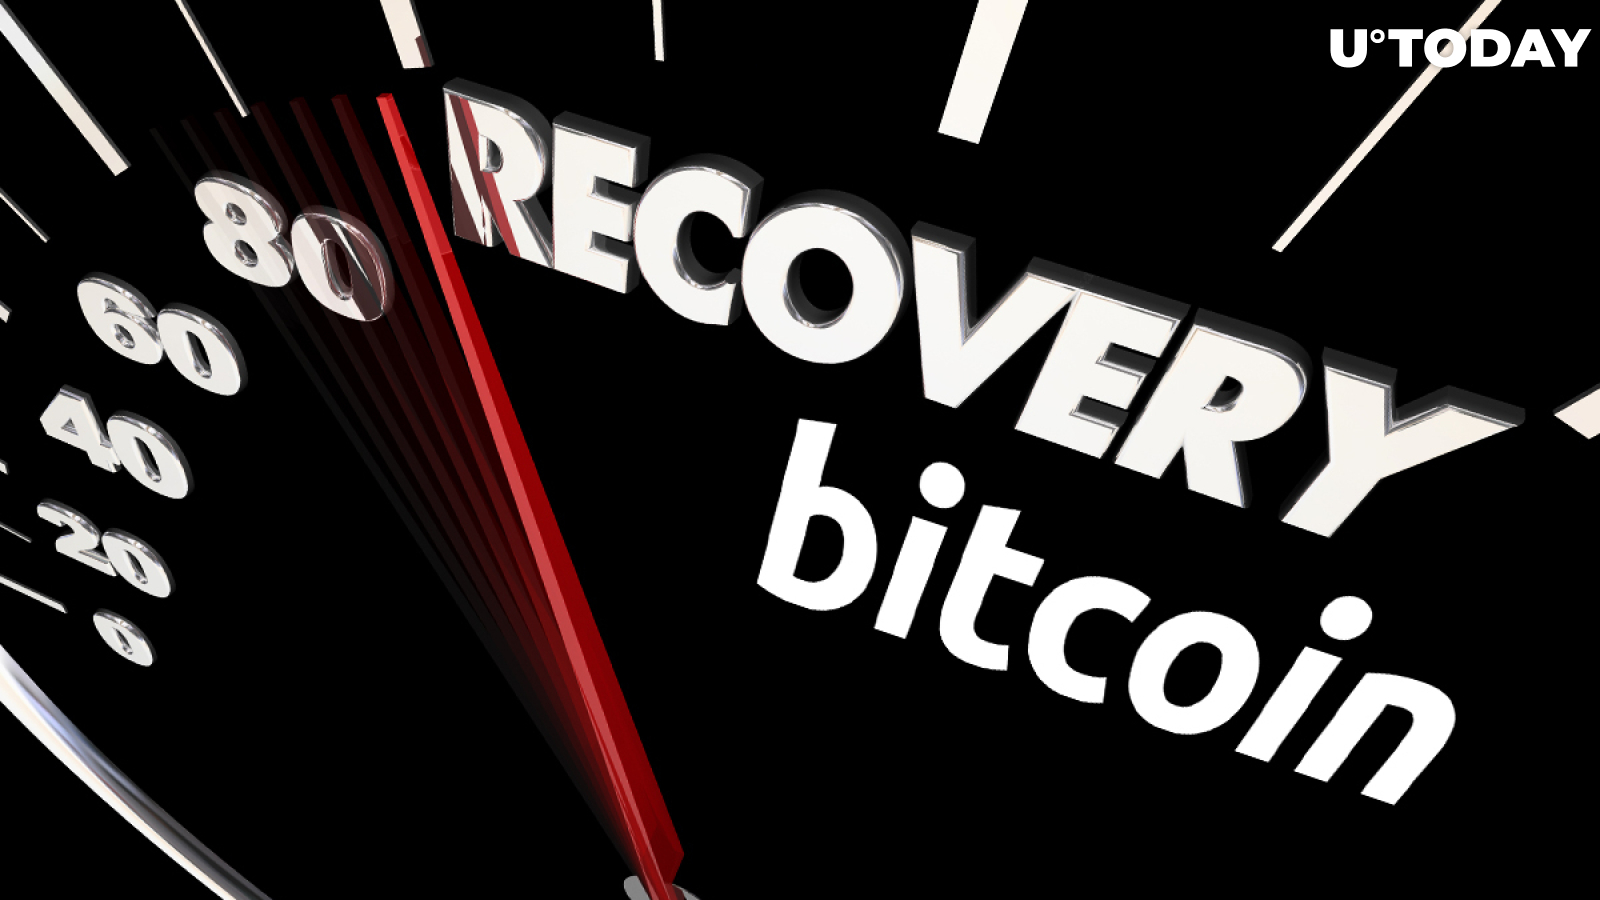 Bitcoin (BTC) Only Asset That Recovered From February Market Collapse, Analysts Say